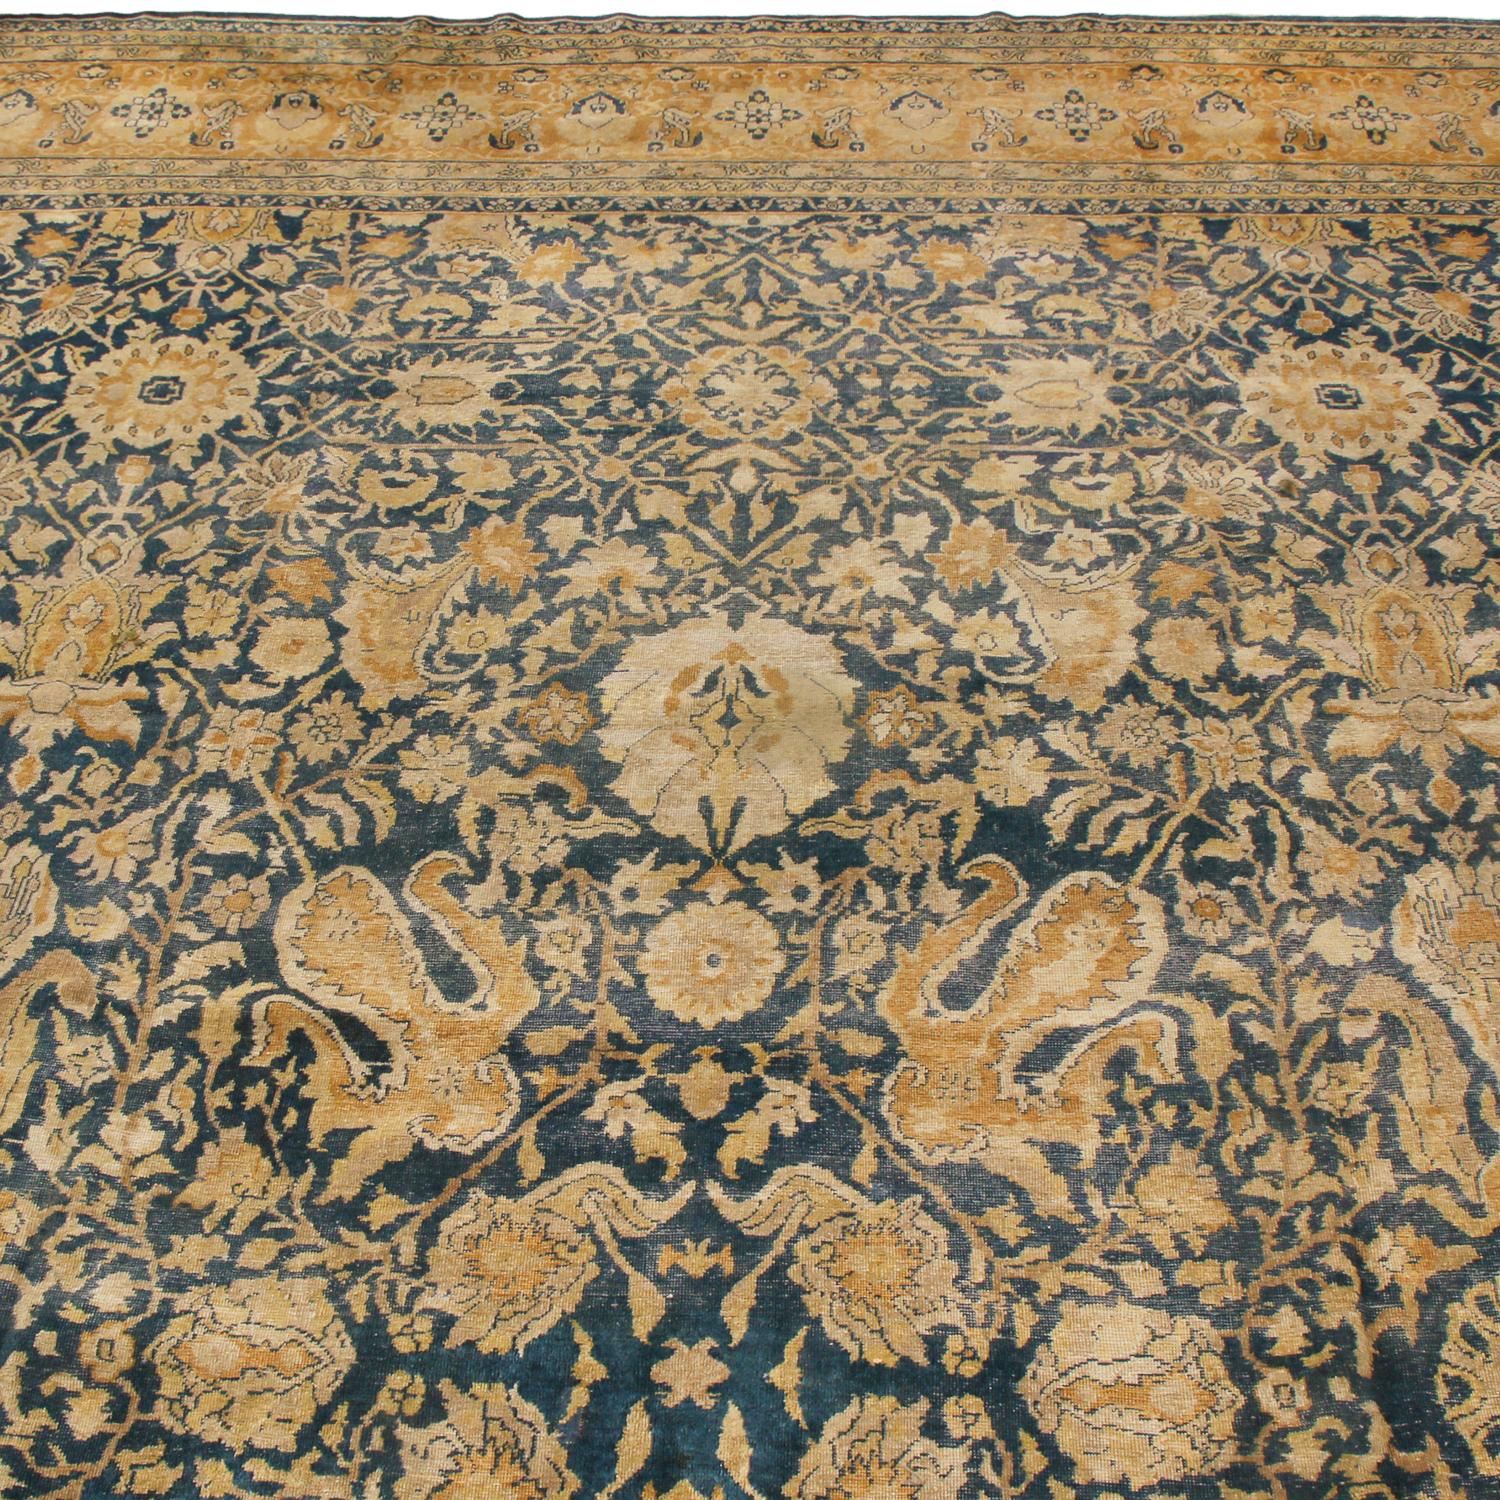 Originating from Persia between 1880-1890, this hand knotted antique Sultanabad rug was crafted with particularly luminous, soft wool complementing both inviting colourways and patterns. Hailing from weavers in the mountains, this combination of